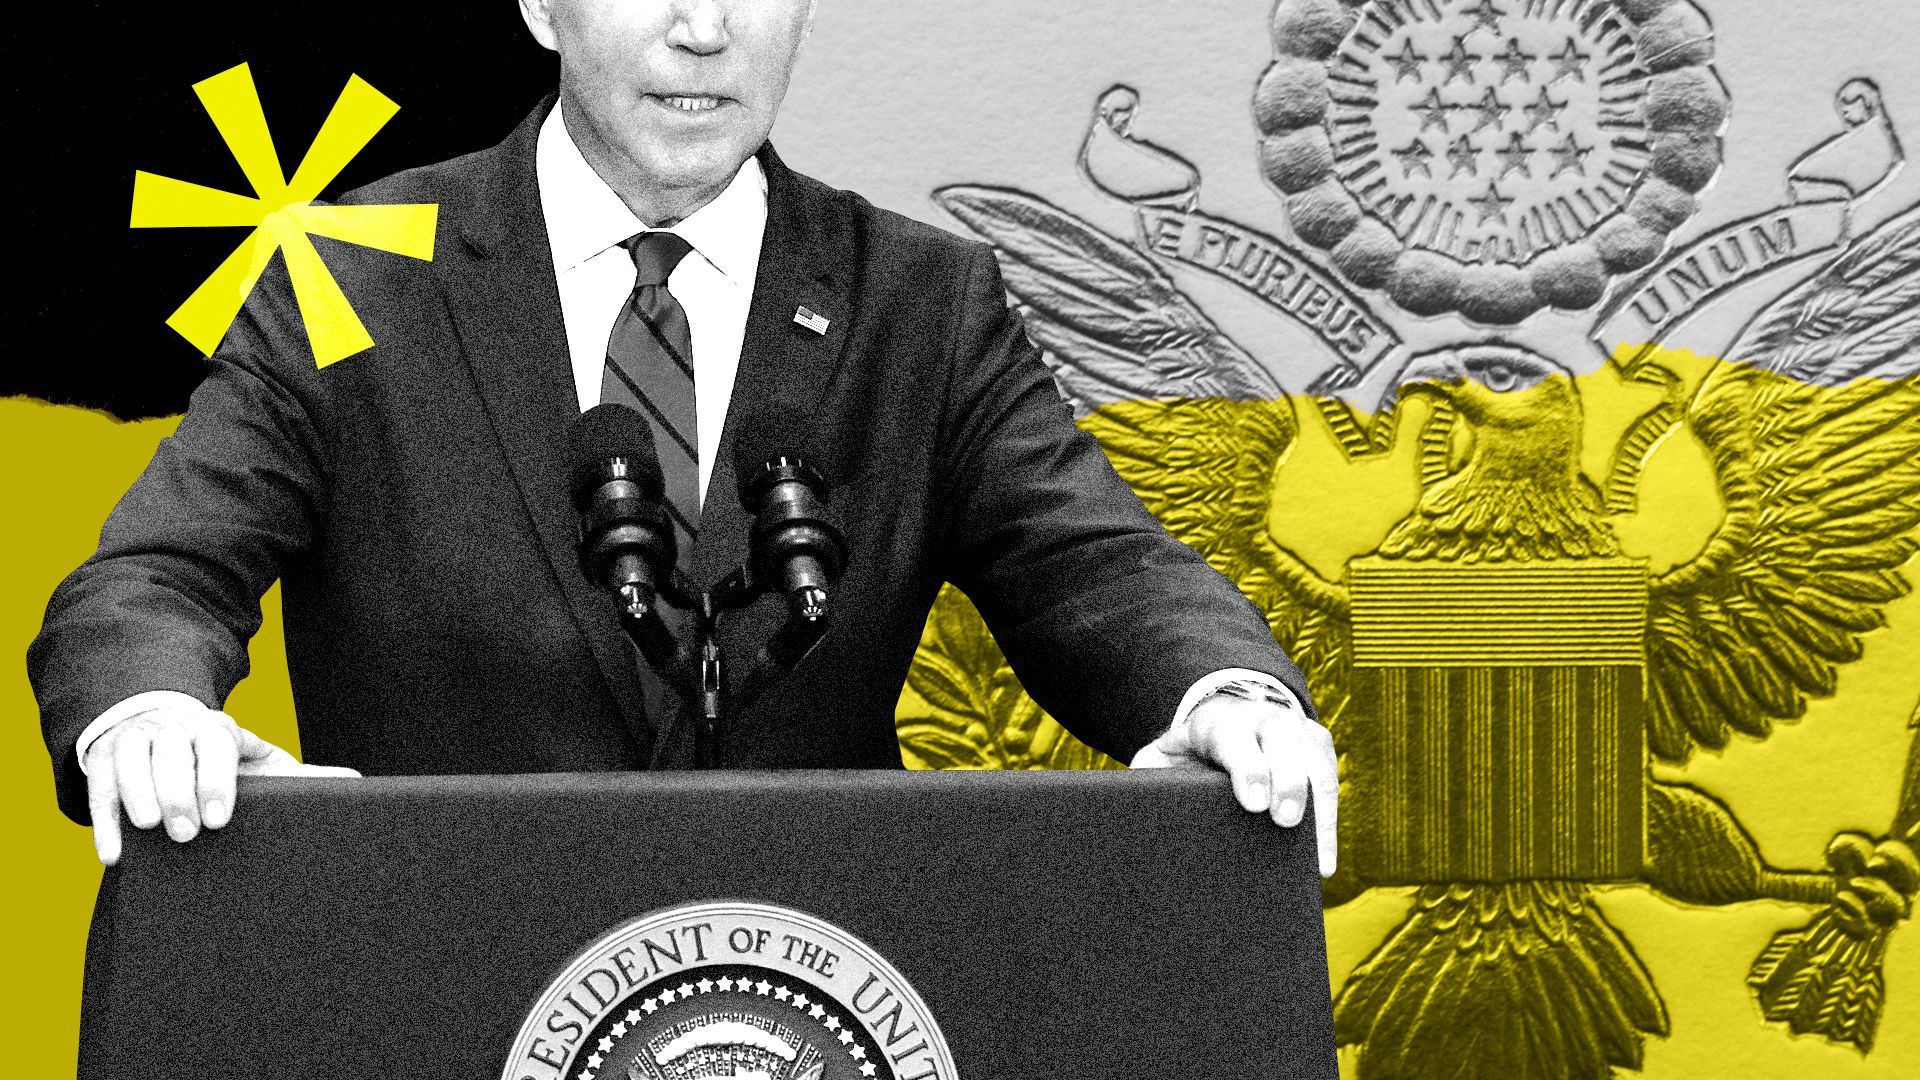 Photo Illustration of Joe Biden speaking at a podium with the presidential seal and an asterisk around him